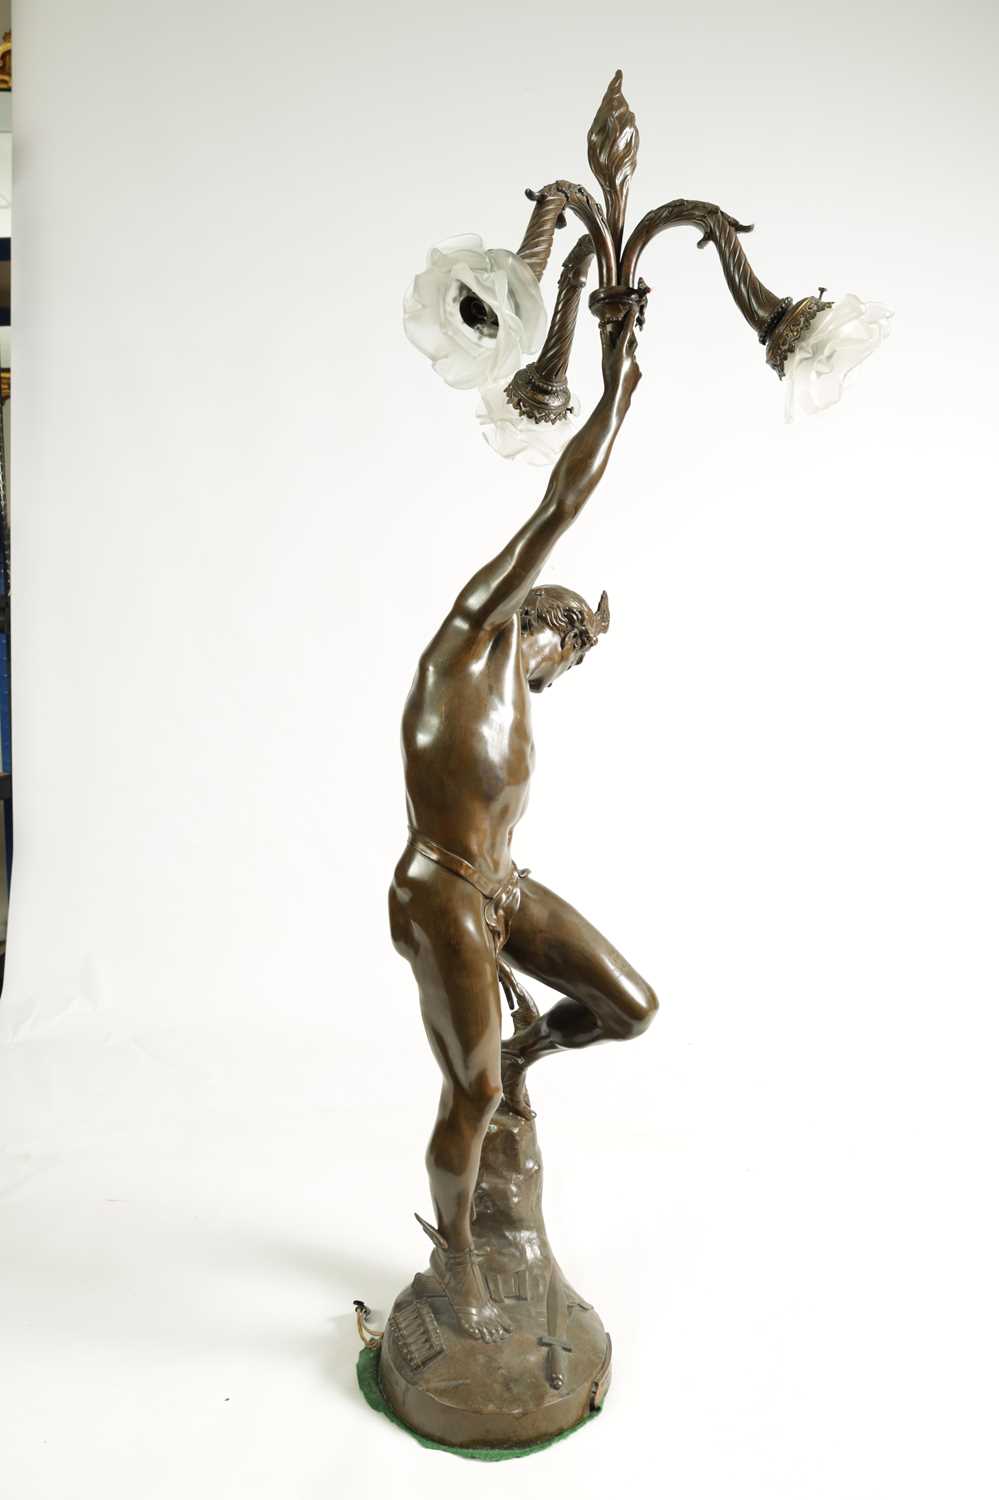 AFTER RAYMOND SUDRE, PARIS. A LARGE EARLY 20TH CENTURY PATINATED BRONZE FIGURAL LAMP - Image 10 of 19